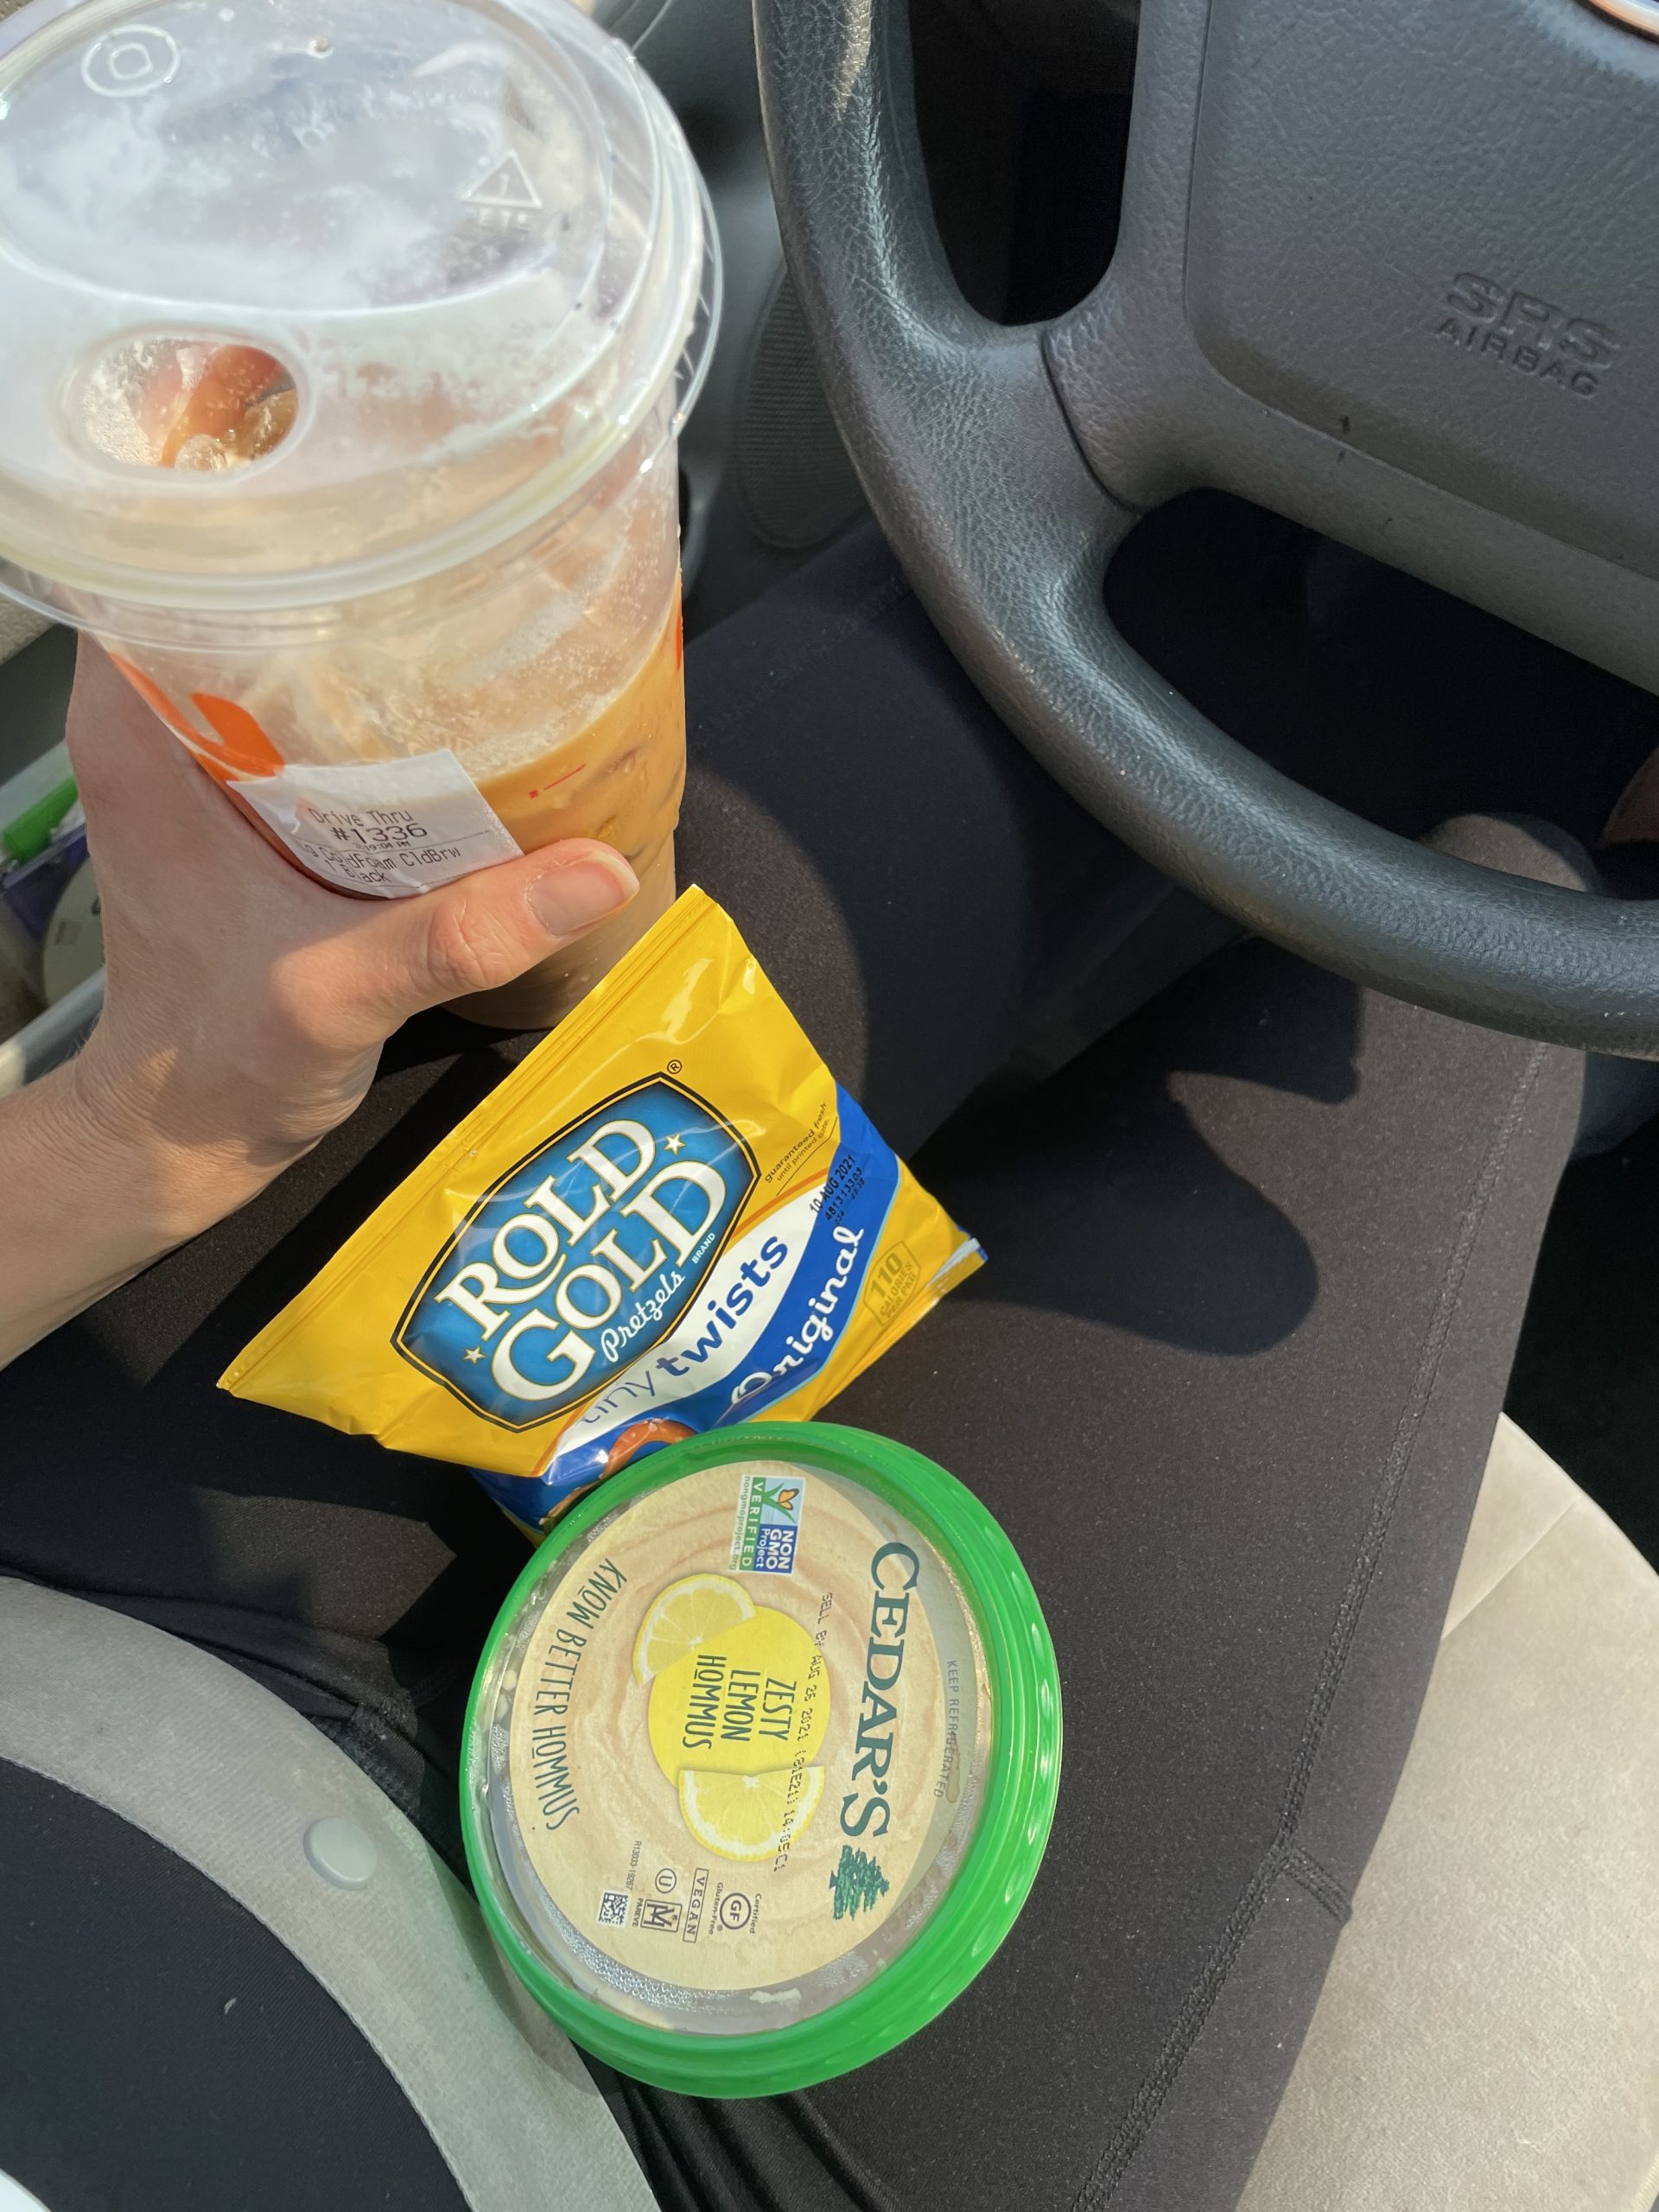 snacks, snacking while driving, road trip snacks, road trip, cross country road trip, saying goodbye to your old car, old car, new car, kia spectra, kia, car accident, post-car accident, feeling sad after a car accident, car totalled